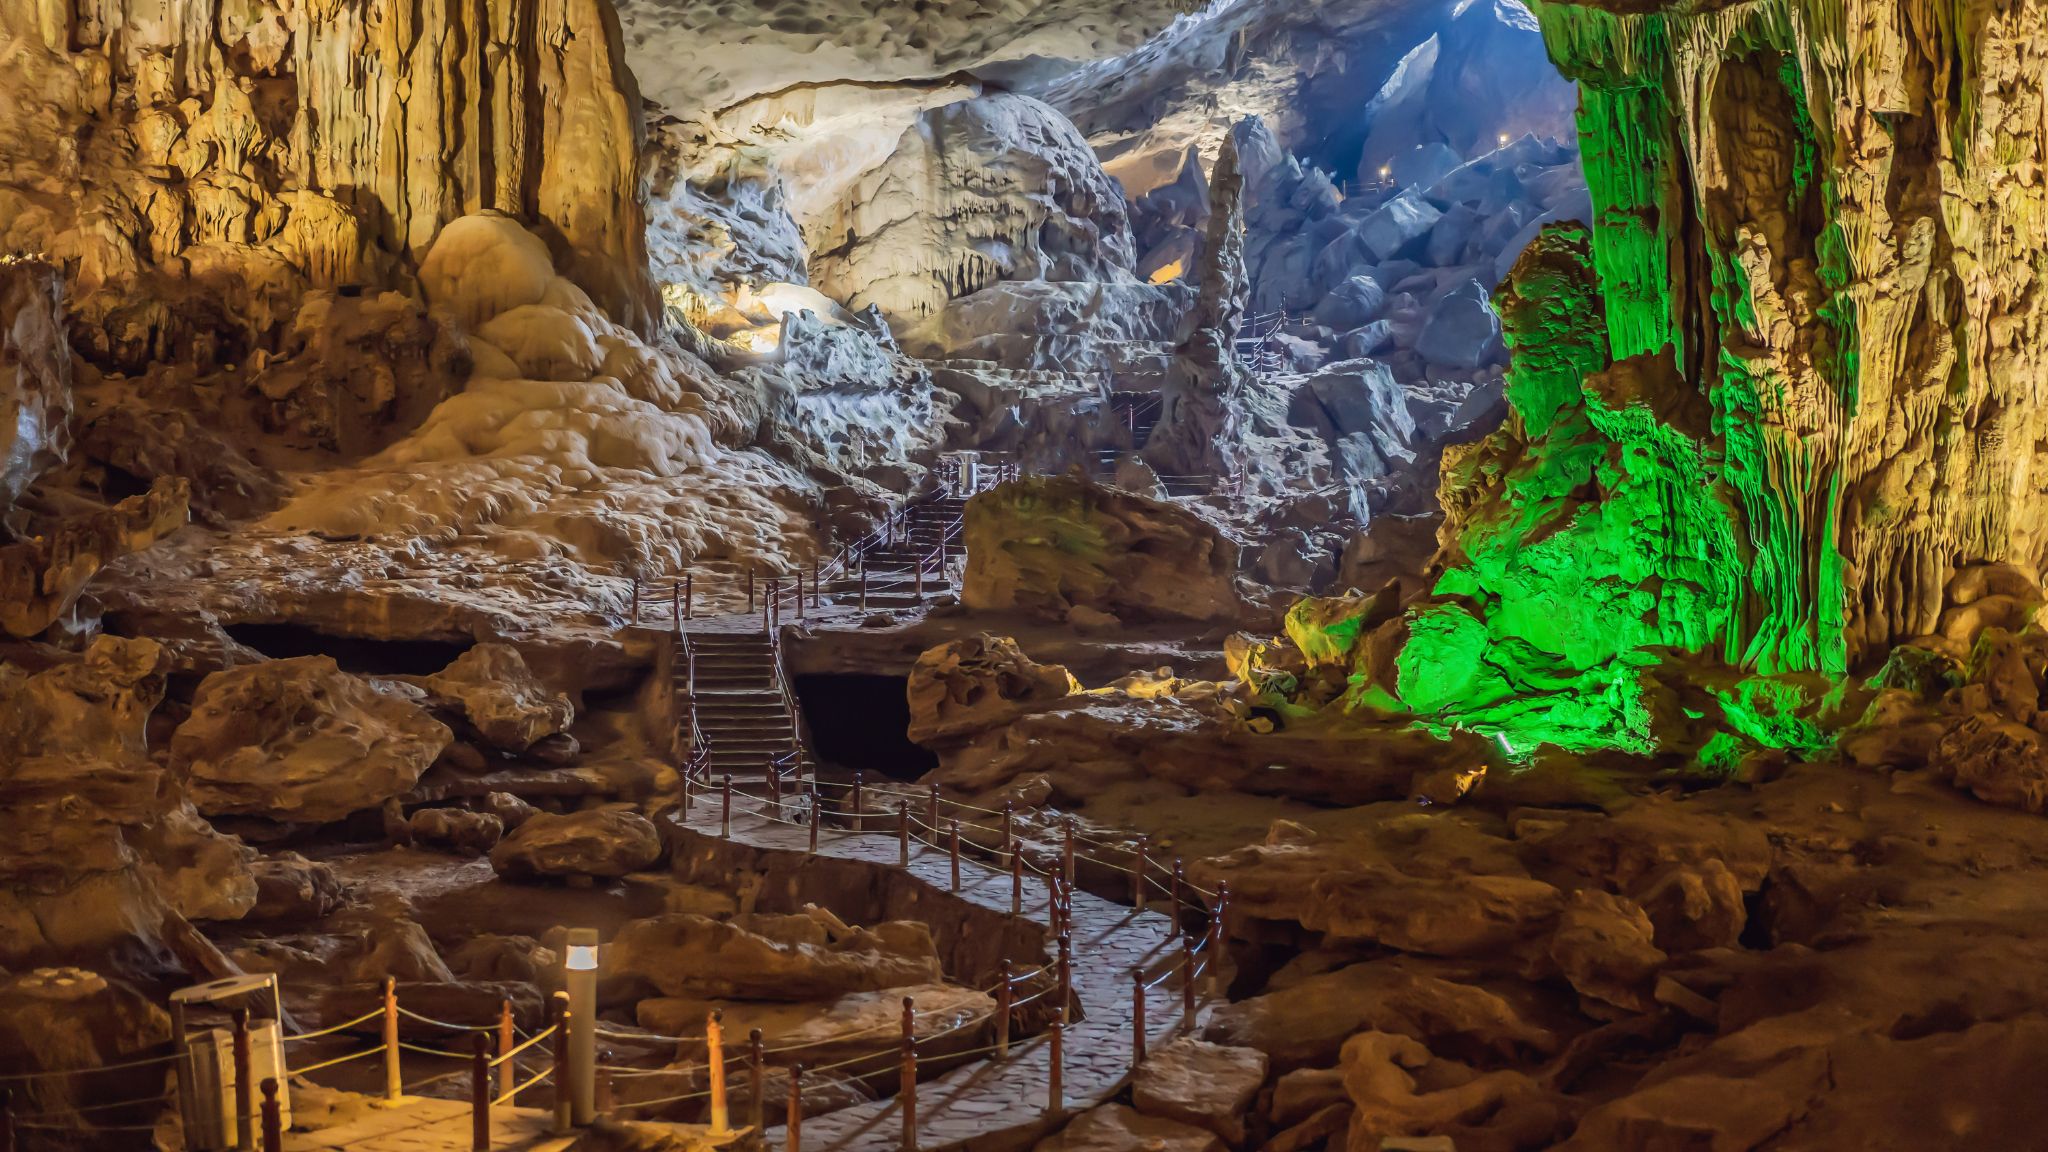 Day 2 Explore The Stunning Sung Sot Cave